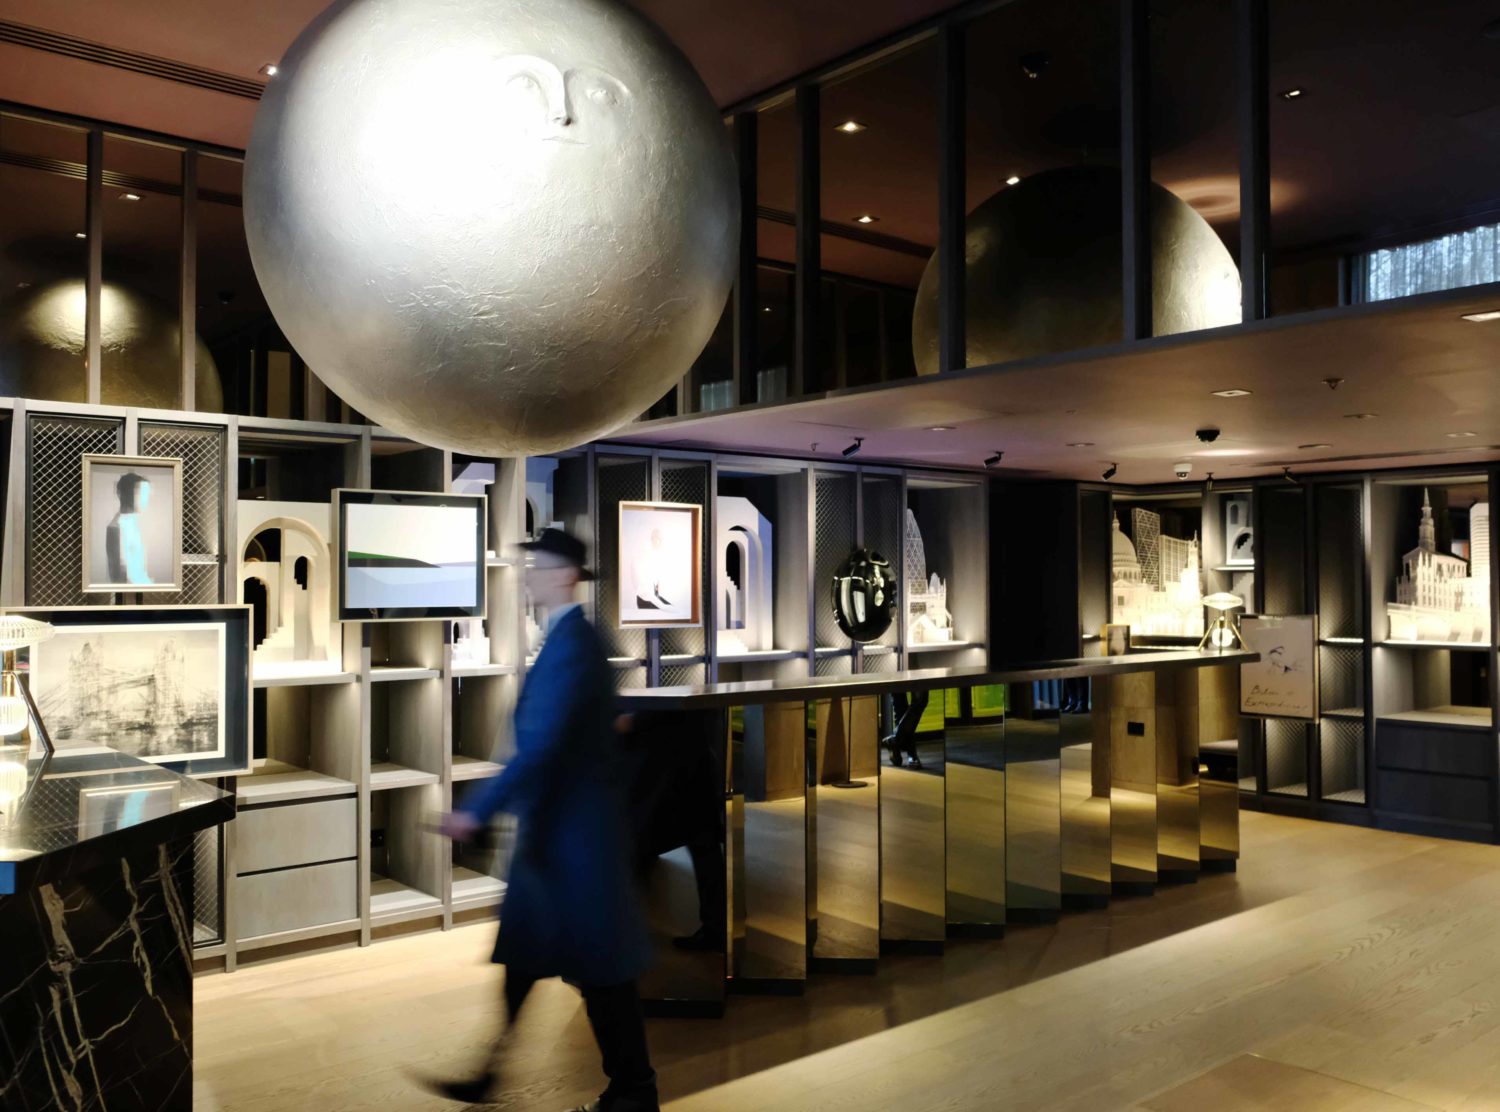 The Londoner At the door you are met by a well-dressed lobby with a stunning Moon installation by Andrew Rae along with works by Tim Walker, Tracey Emin, Idris Khan, Marc Quinn.. You get it, it’s a strong artwork game in here